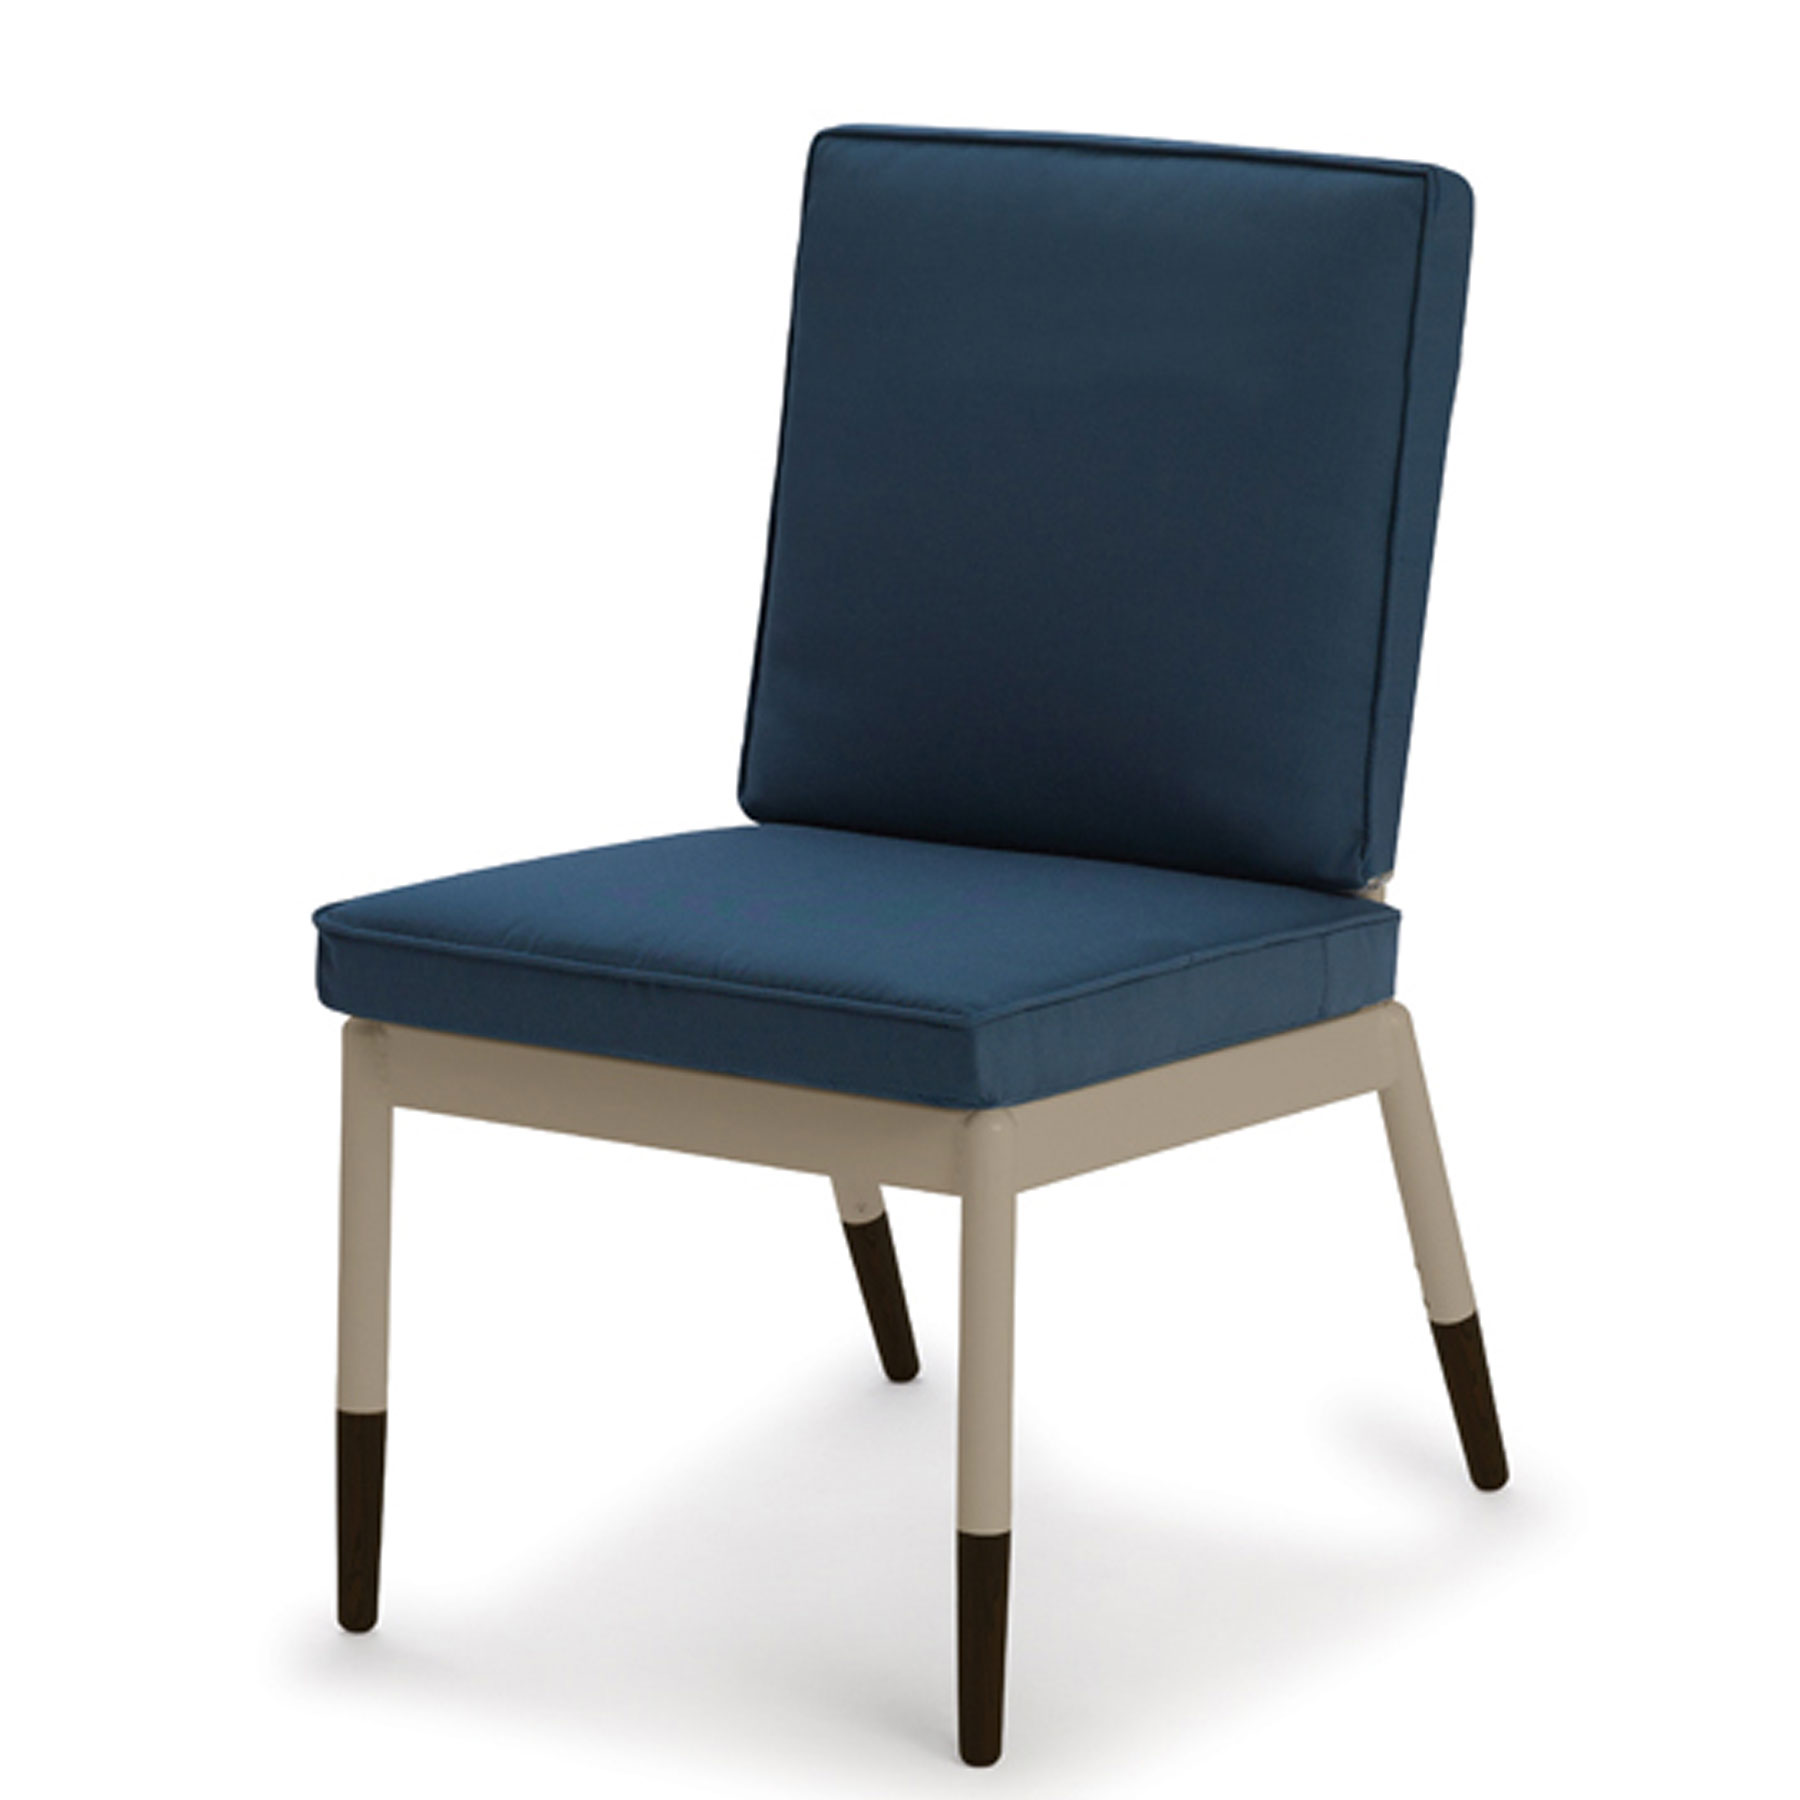 Telescope Casual Welles Armless Dining Chair with Welting